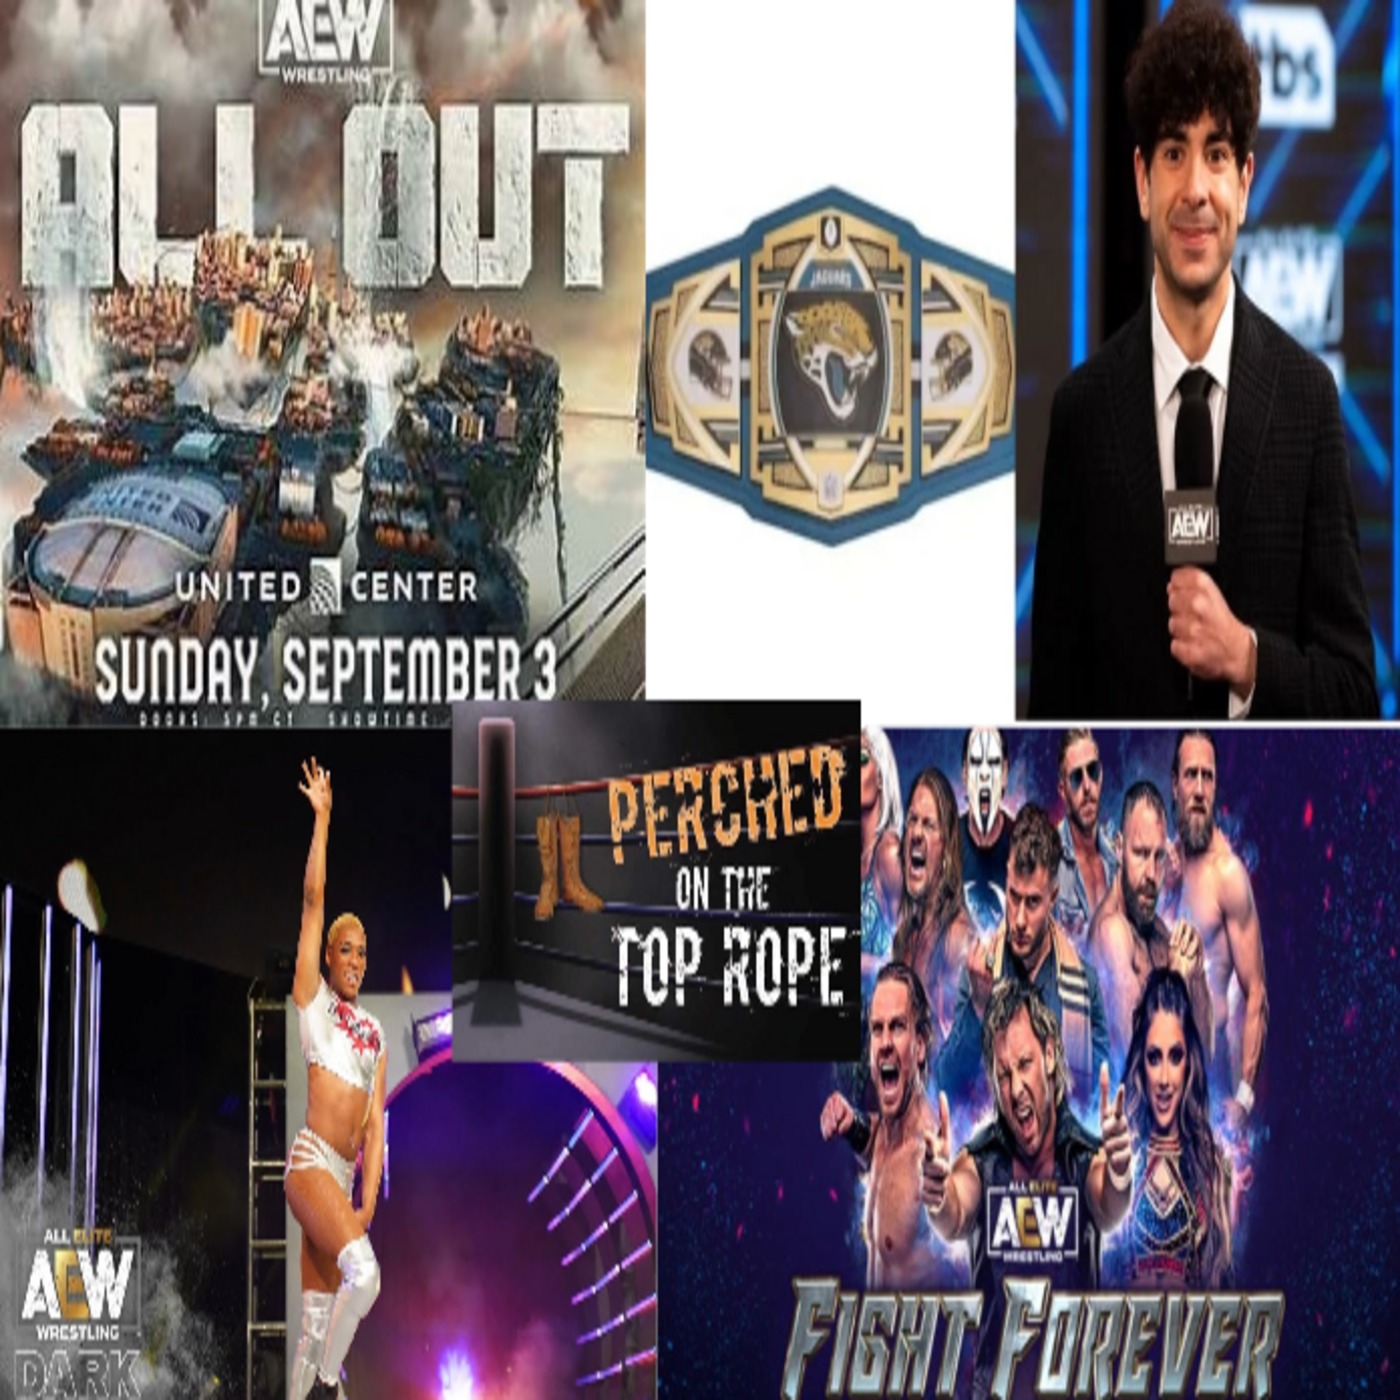 E151: AEW ALL OUT Predictions, Sonny Kiss Gone From AEW, AEW Fight Forever Stadium Stampede Review